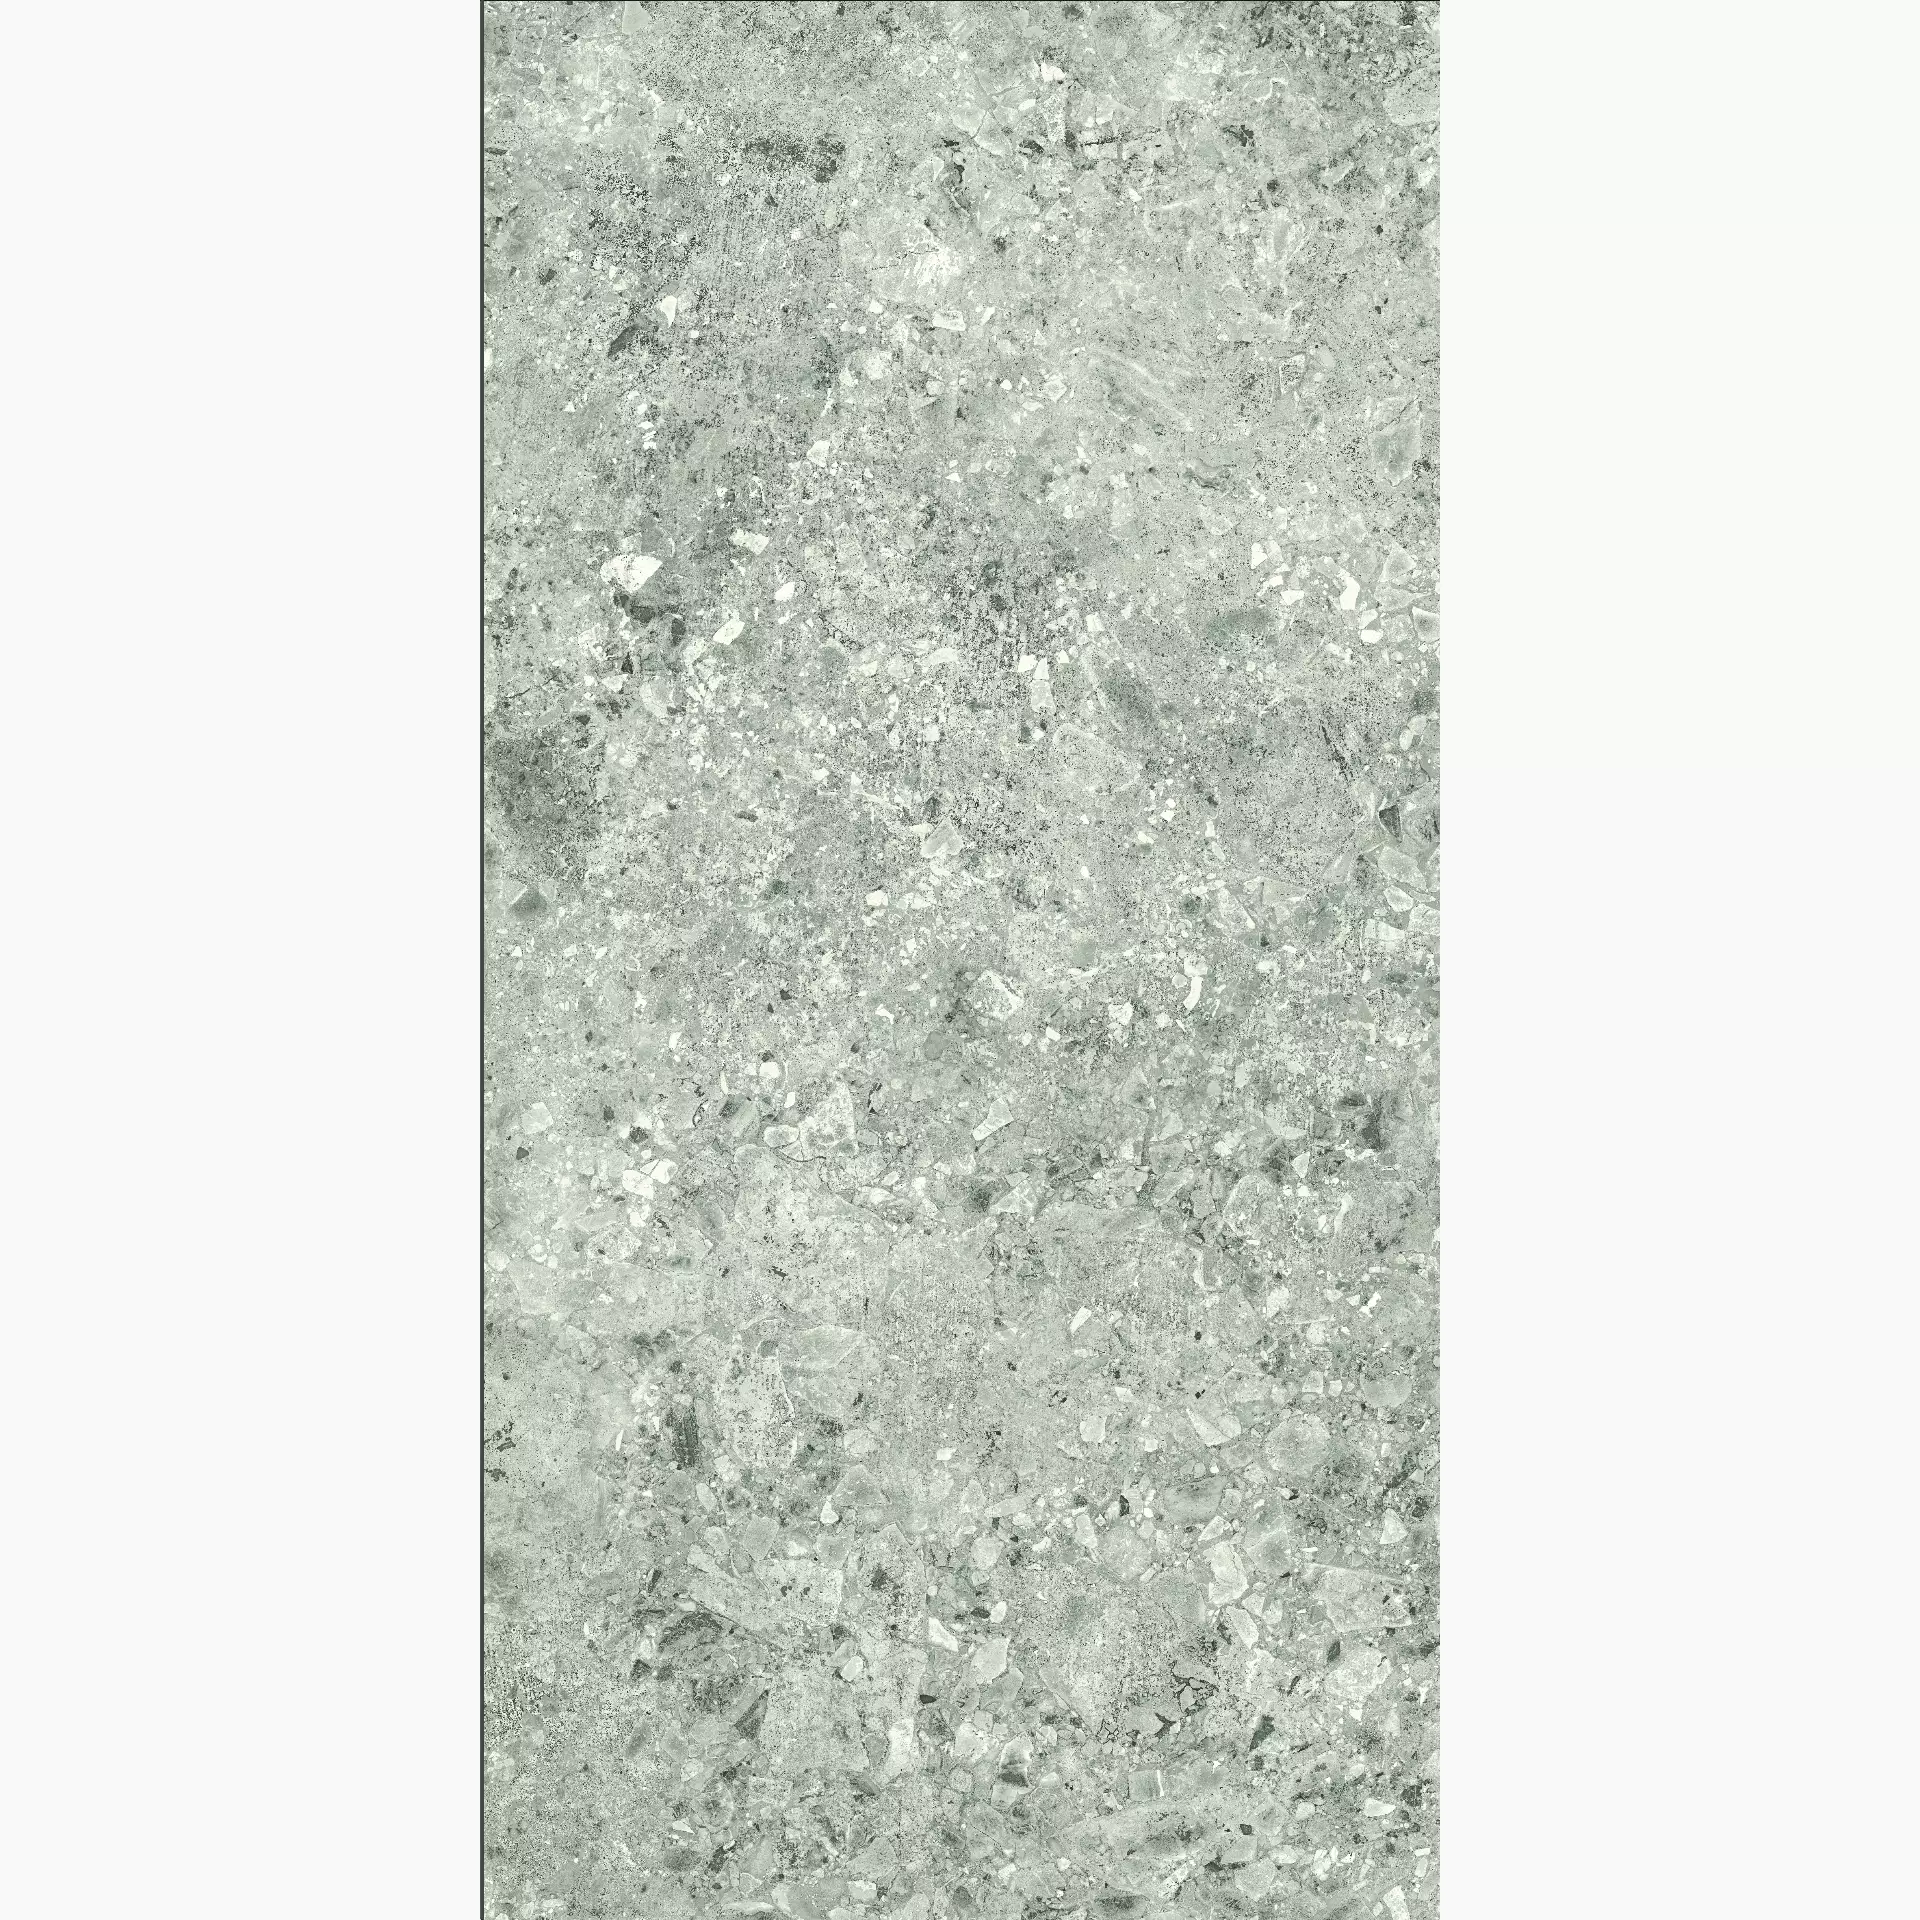 Magica Ceppo Grey Structured MACE02612N2 60x120cm rectified 20mm